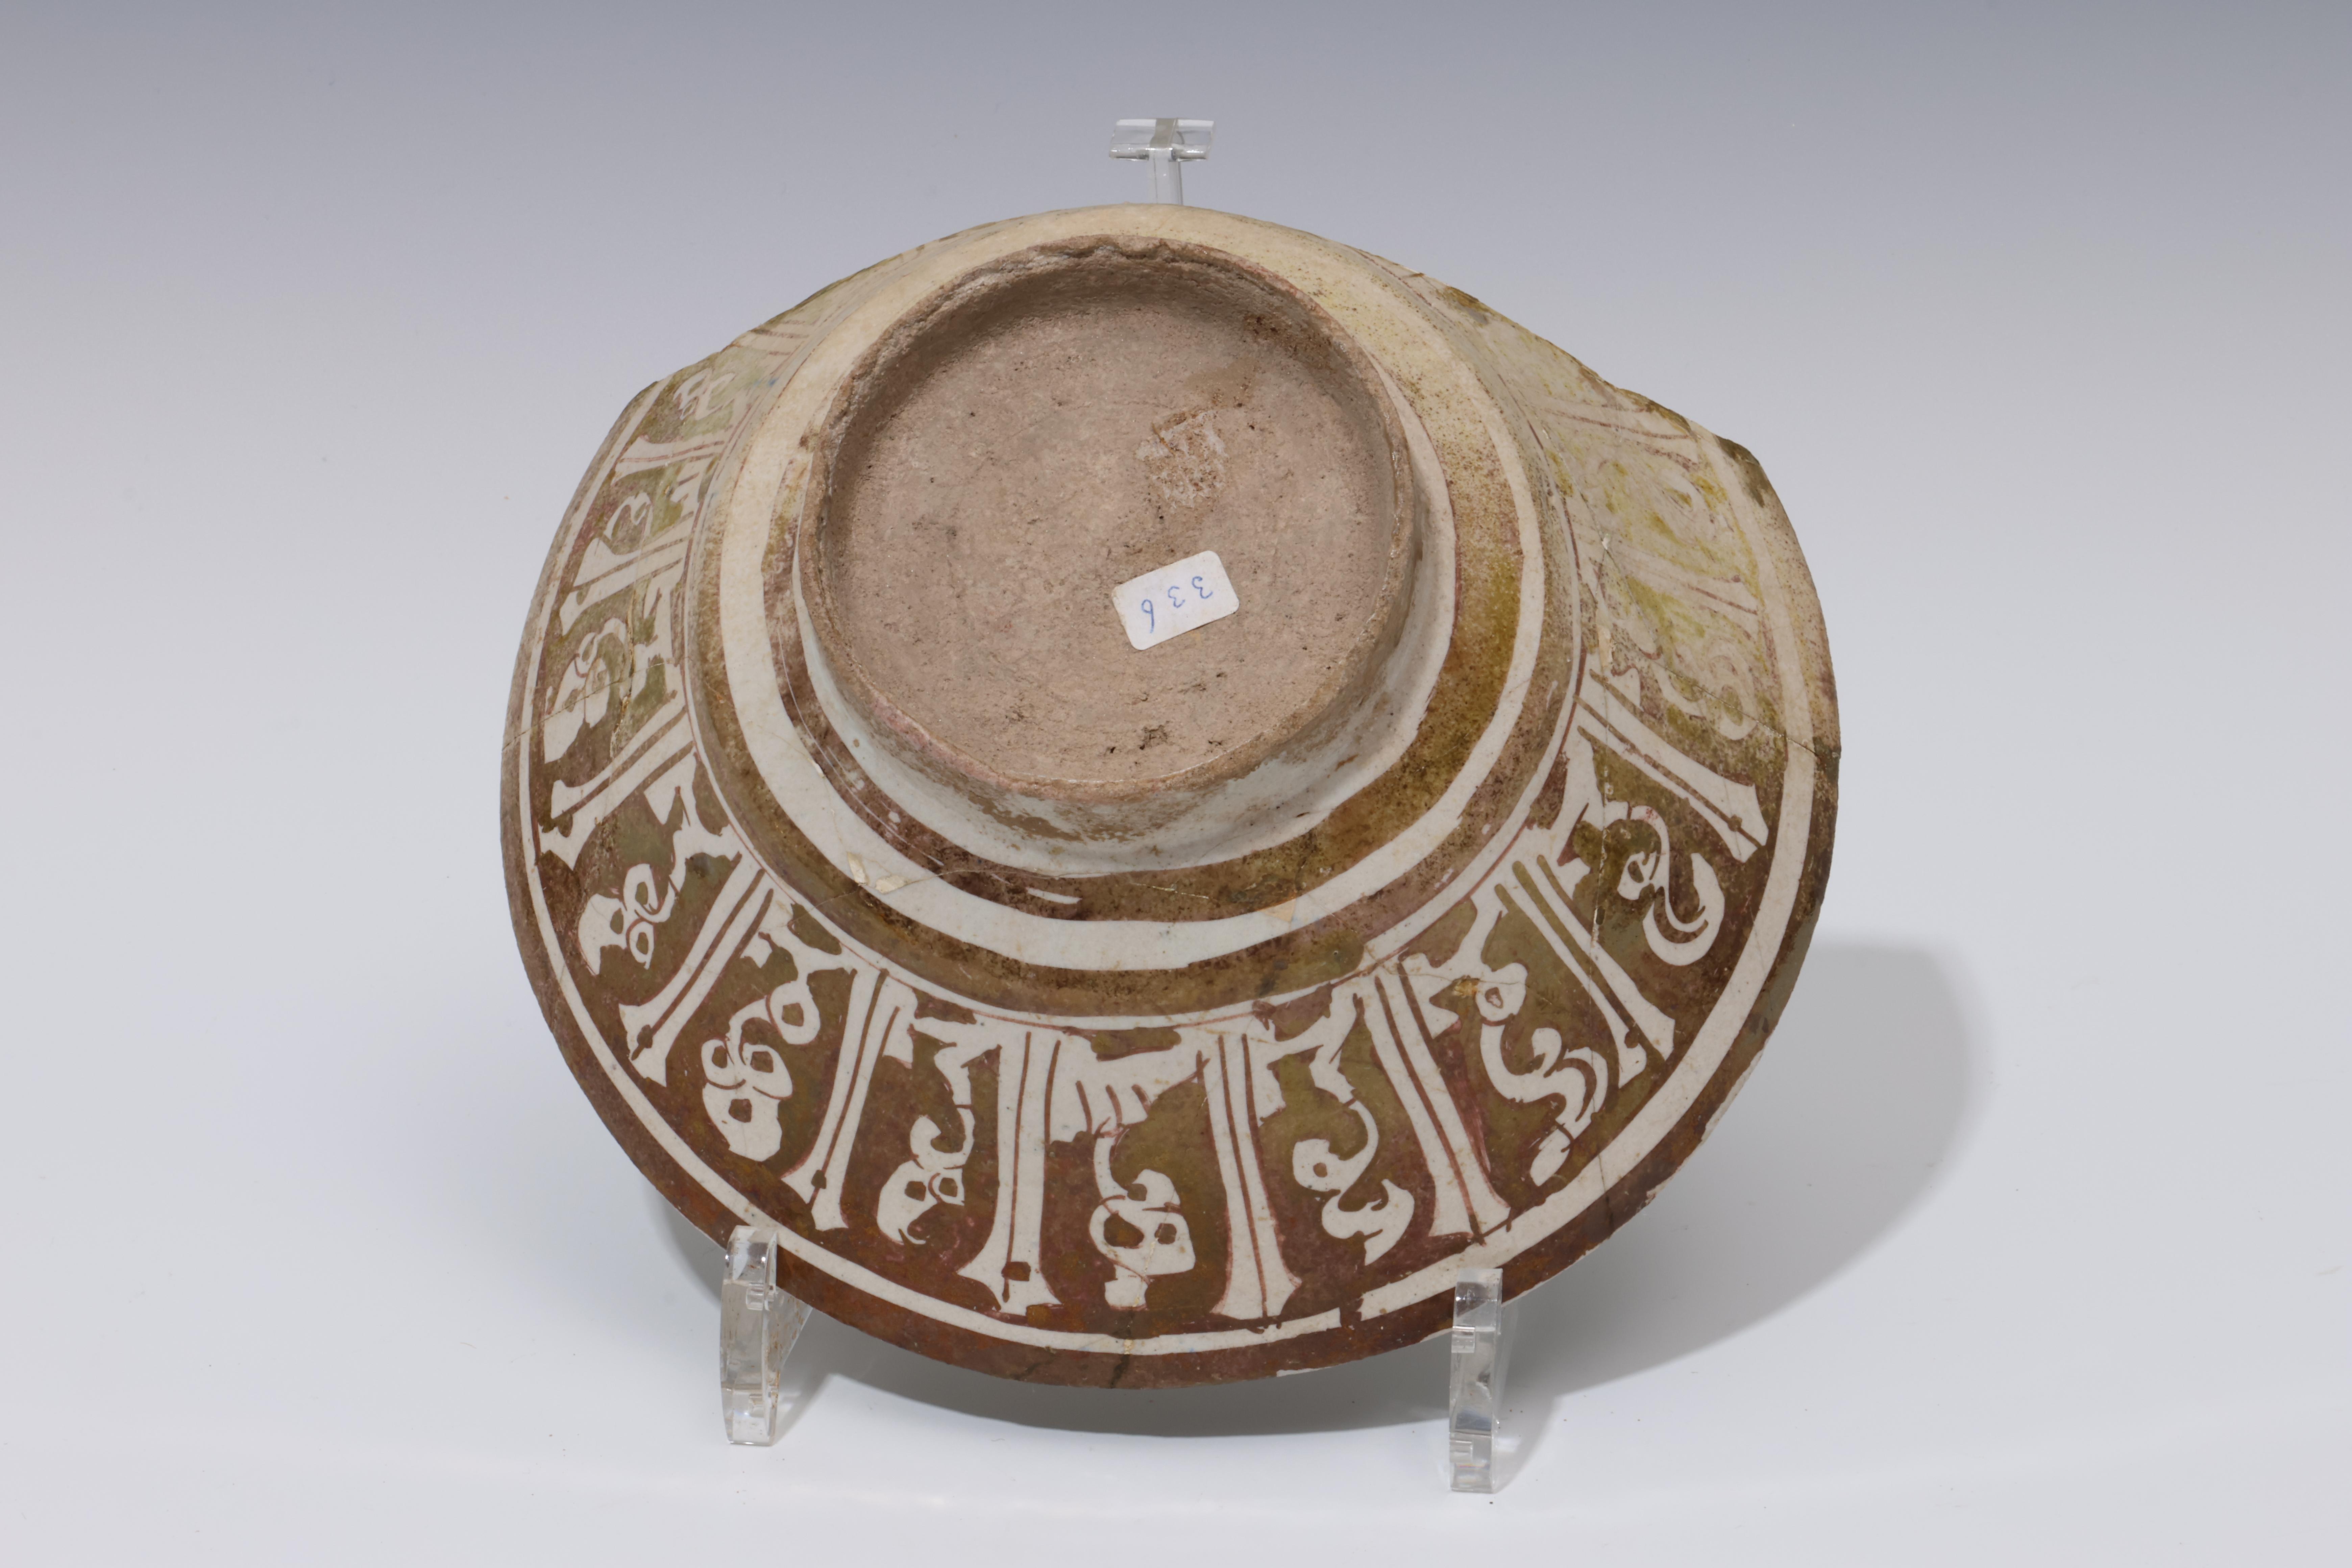 Persian terracotta bowl with luster glaze, ca. 12th-14th century (damaged) and a blue glazed dish an - Image 2 of 7